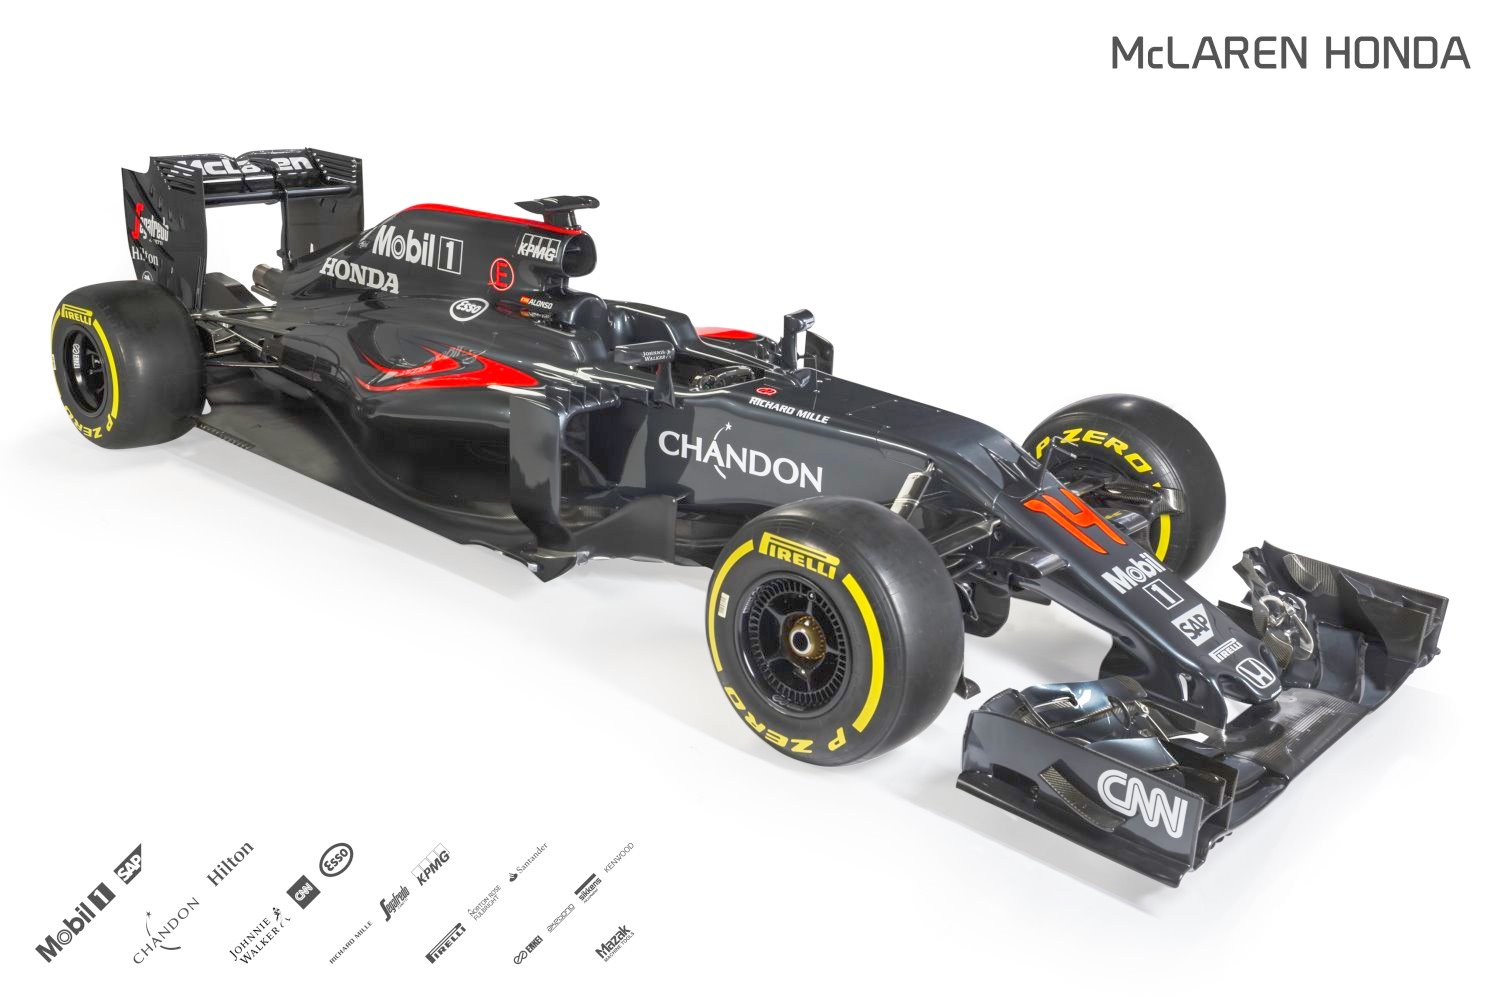 The new McLaren is better but what about its Honda engine?